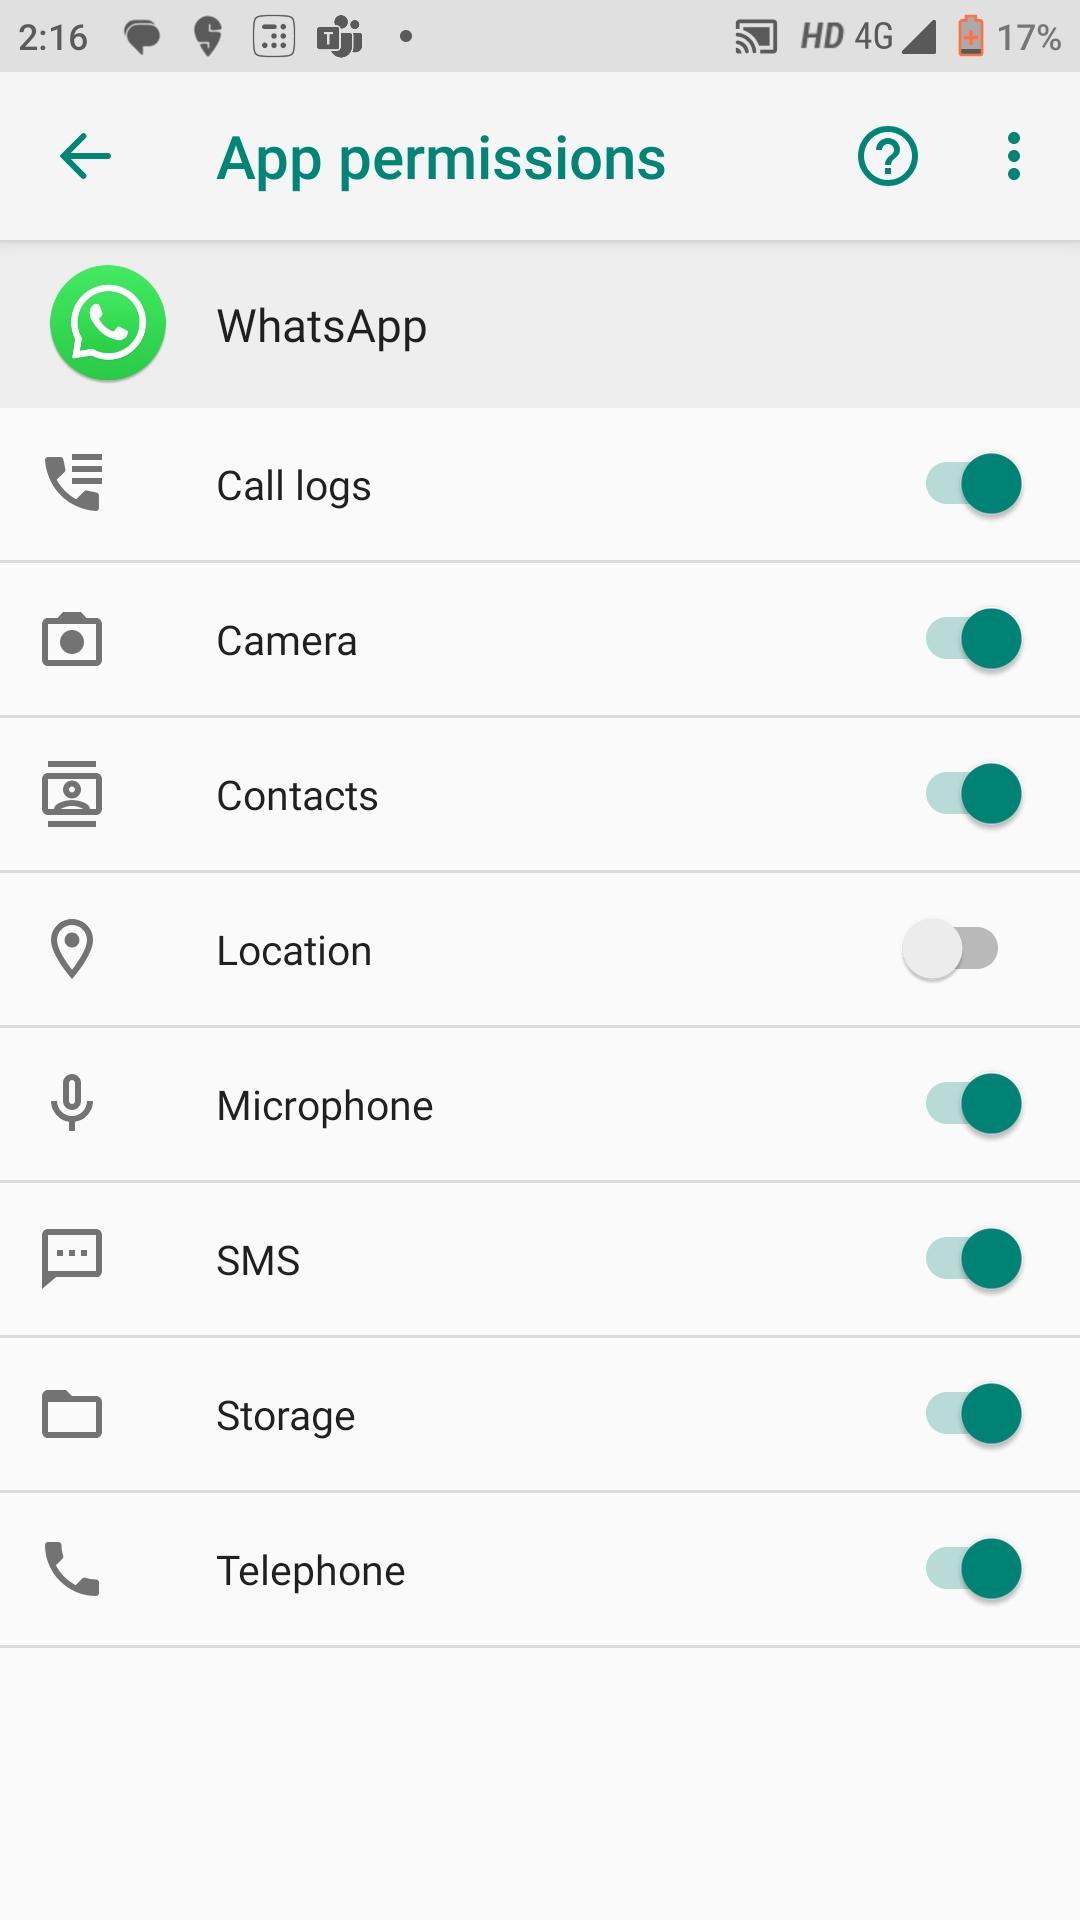 Review the list of apps under "App permission" and toggle location access off per app.